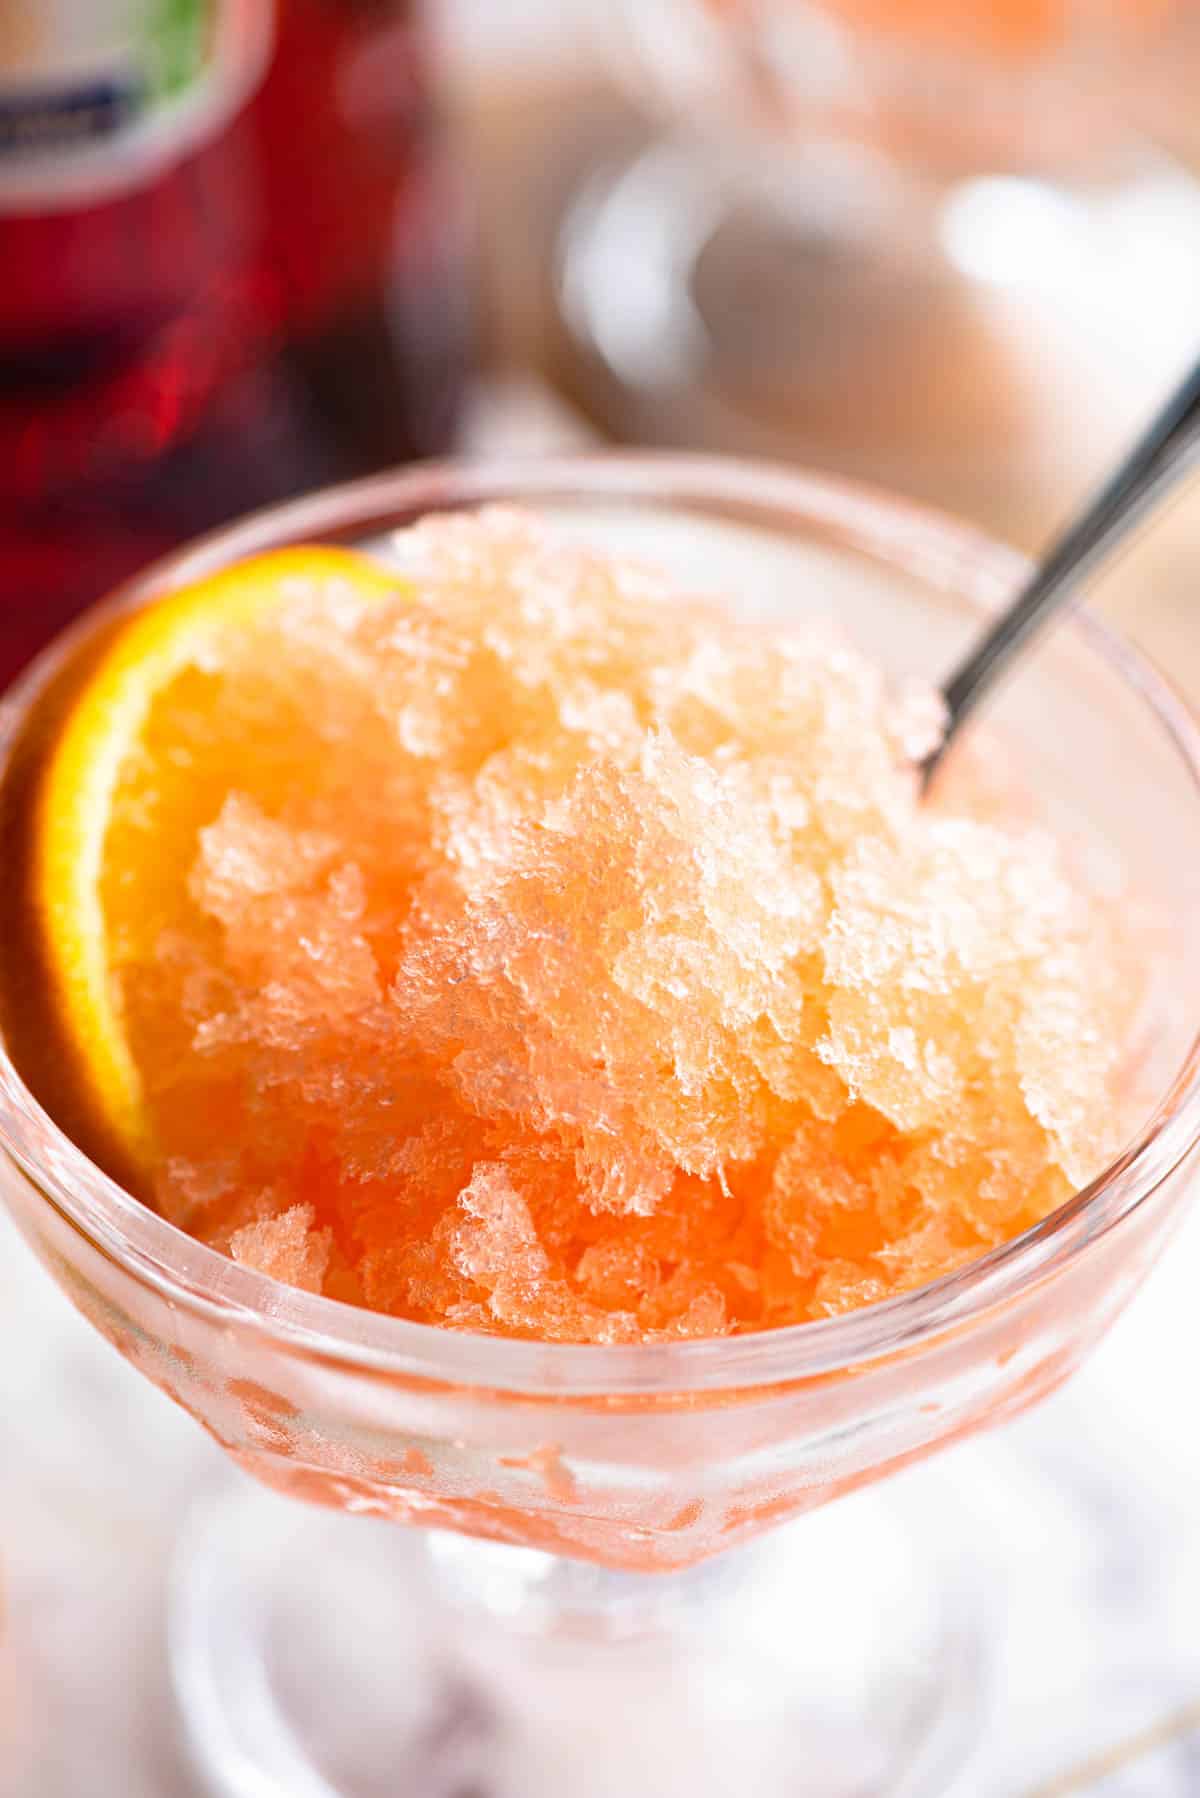 A close up of Aperol granita in a small glass bowl with a spoon and slice of orange at the side.